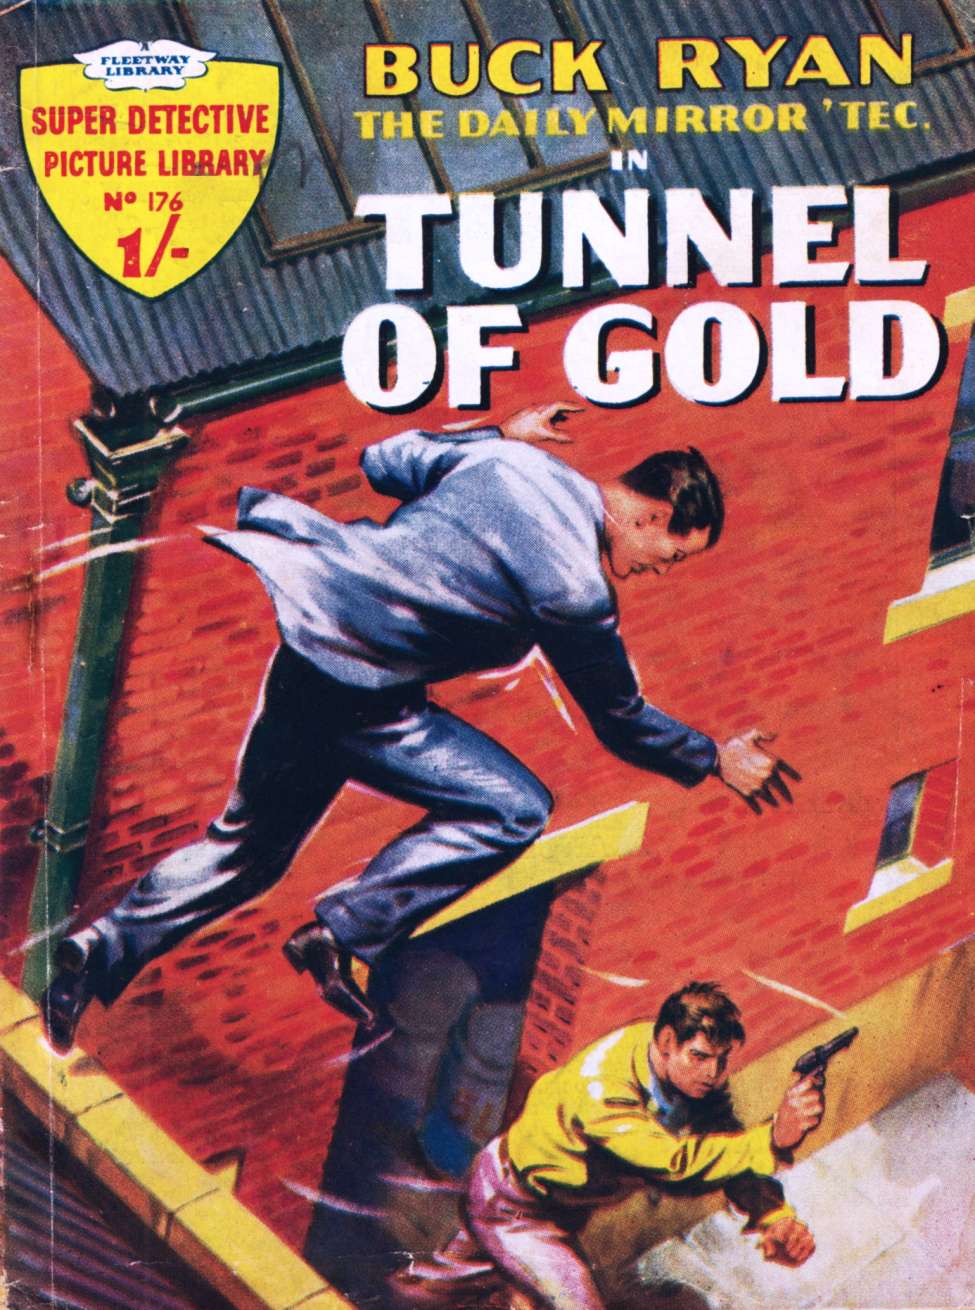 Book Cover For Super Detective Library 176 - Buck Ryan in Tunnel of Gold